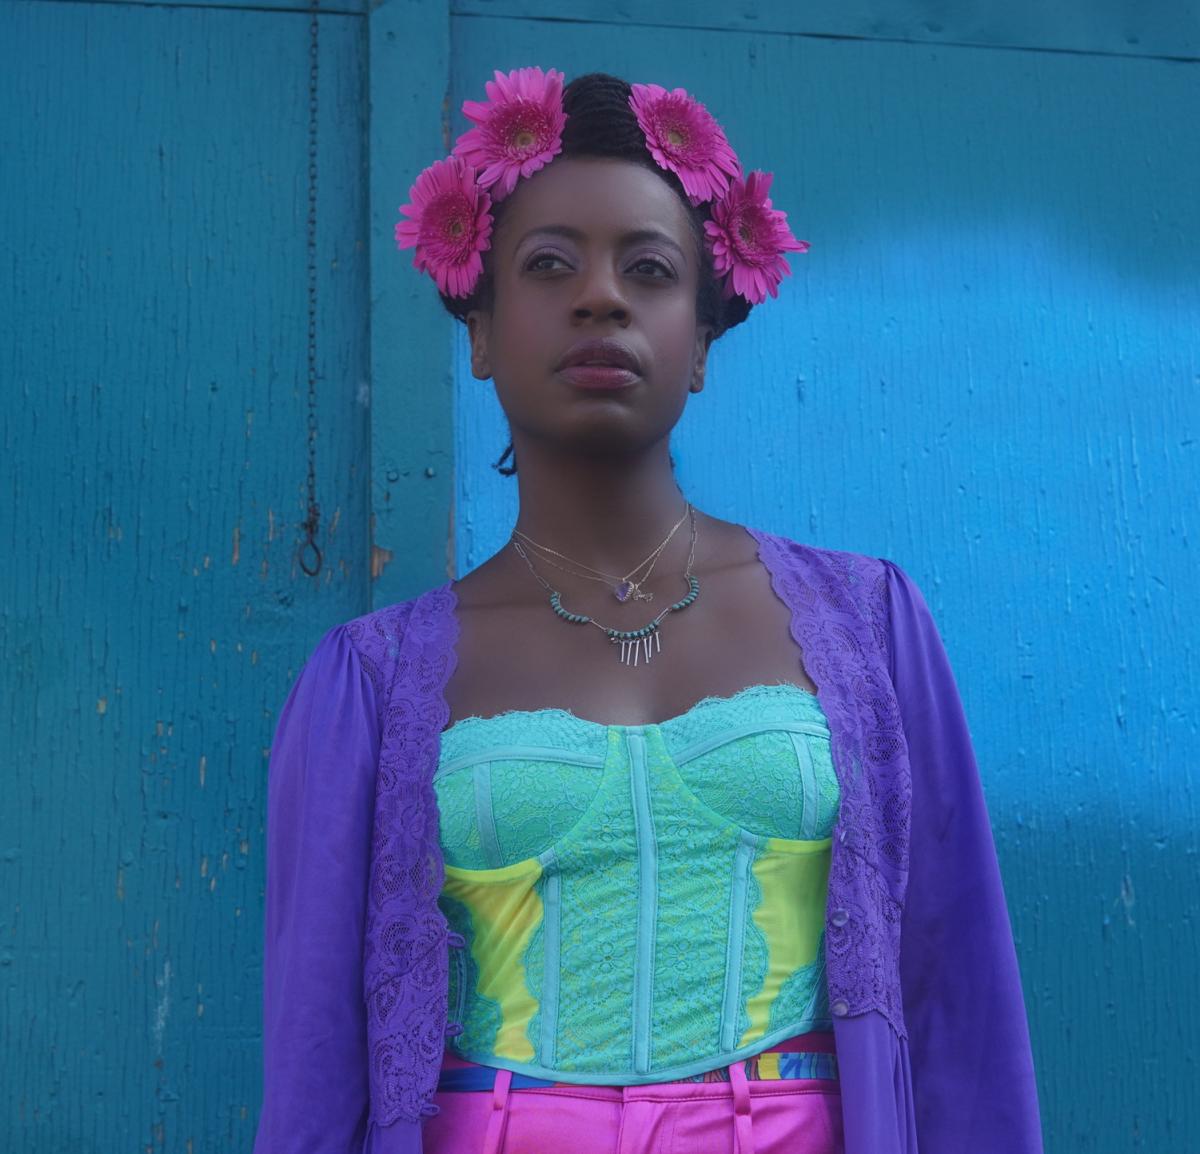 An African-American woman in colorful dress with a pink floral crown.